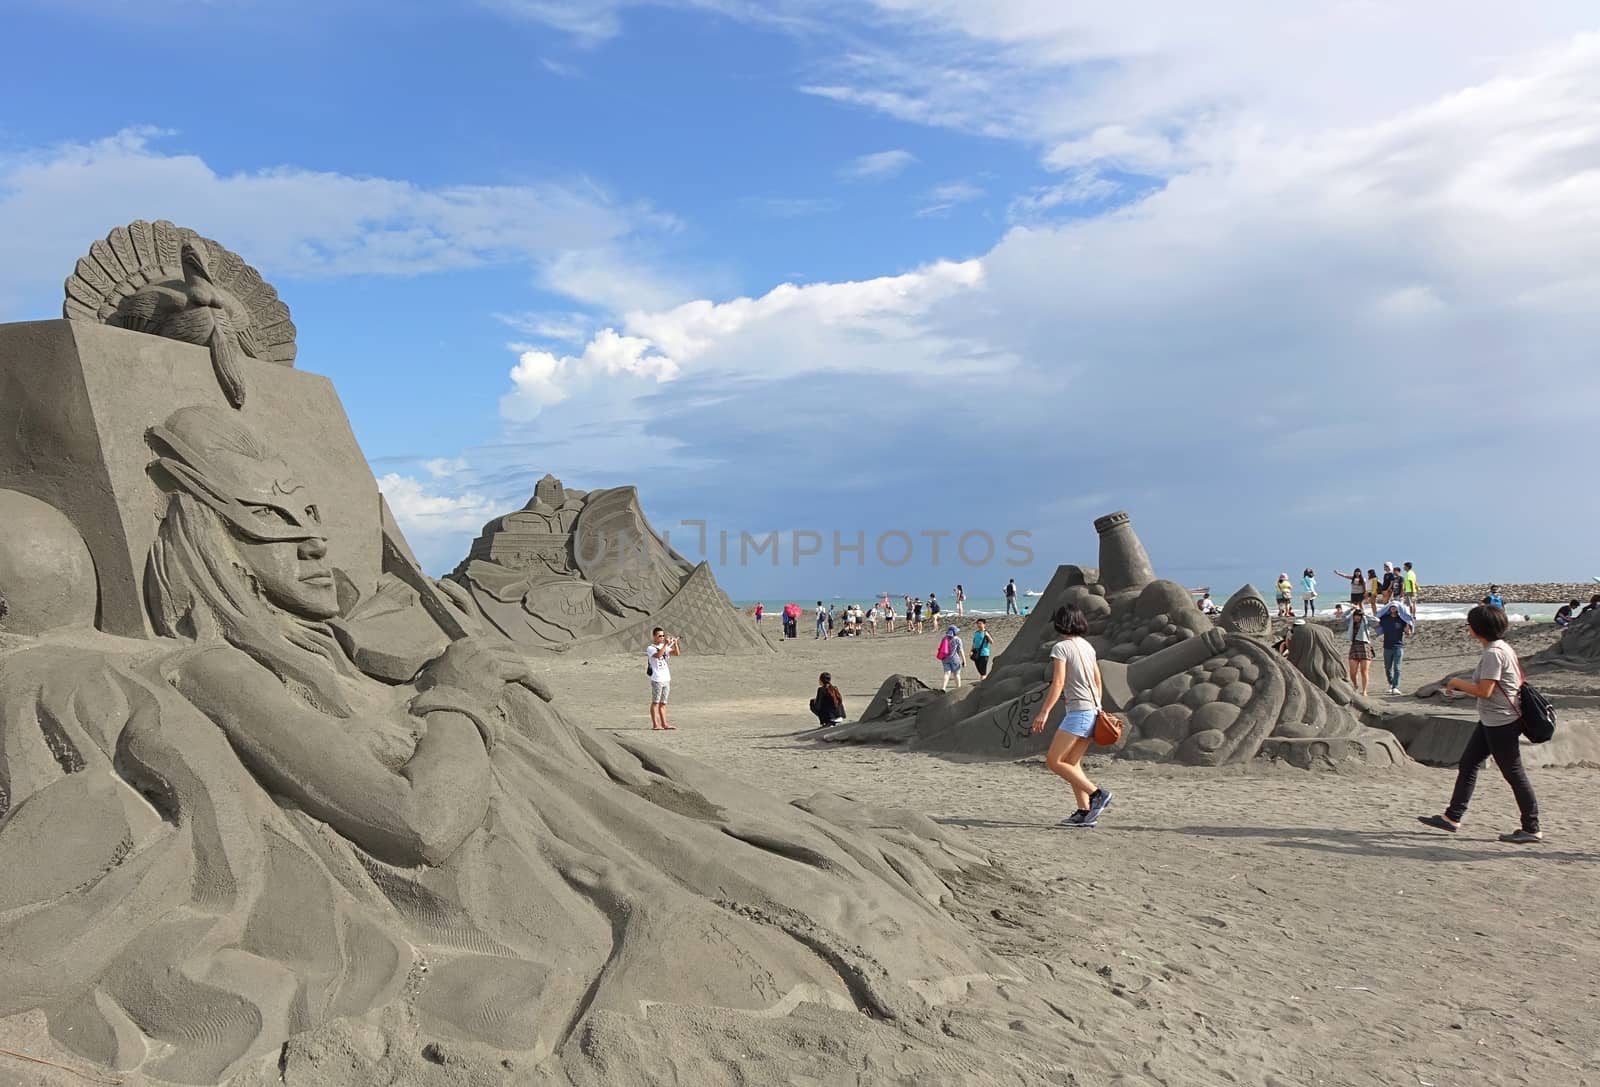 KAOHSIUNG, TAIWAN -- AUGUST 12, 2015: Visitors take photos of art objects at the 2015 Sand Sculpture Festival on Chijin Island.
